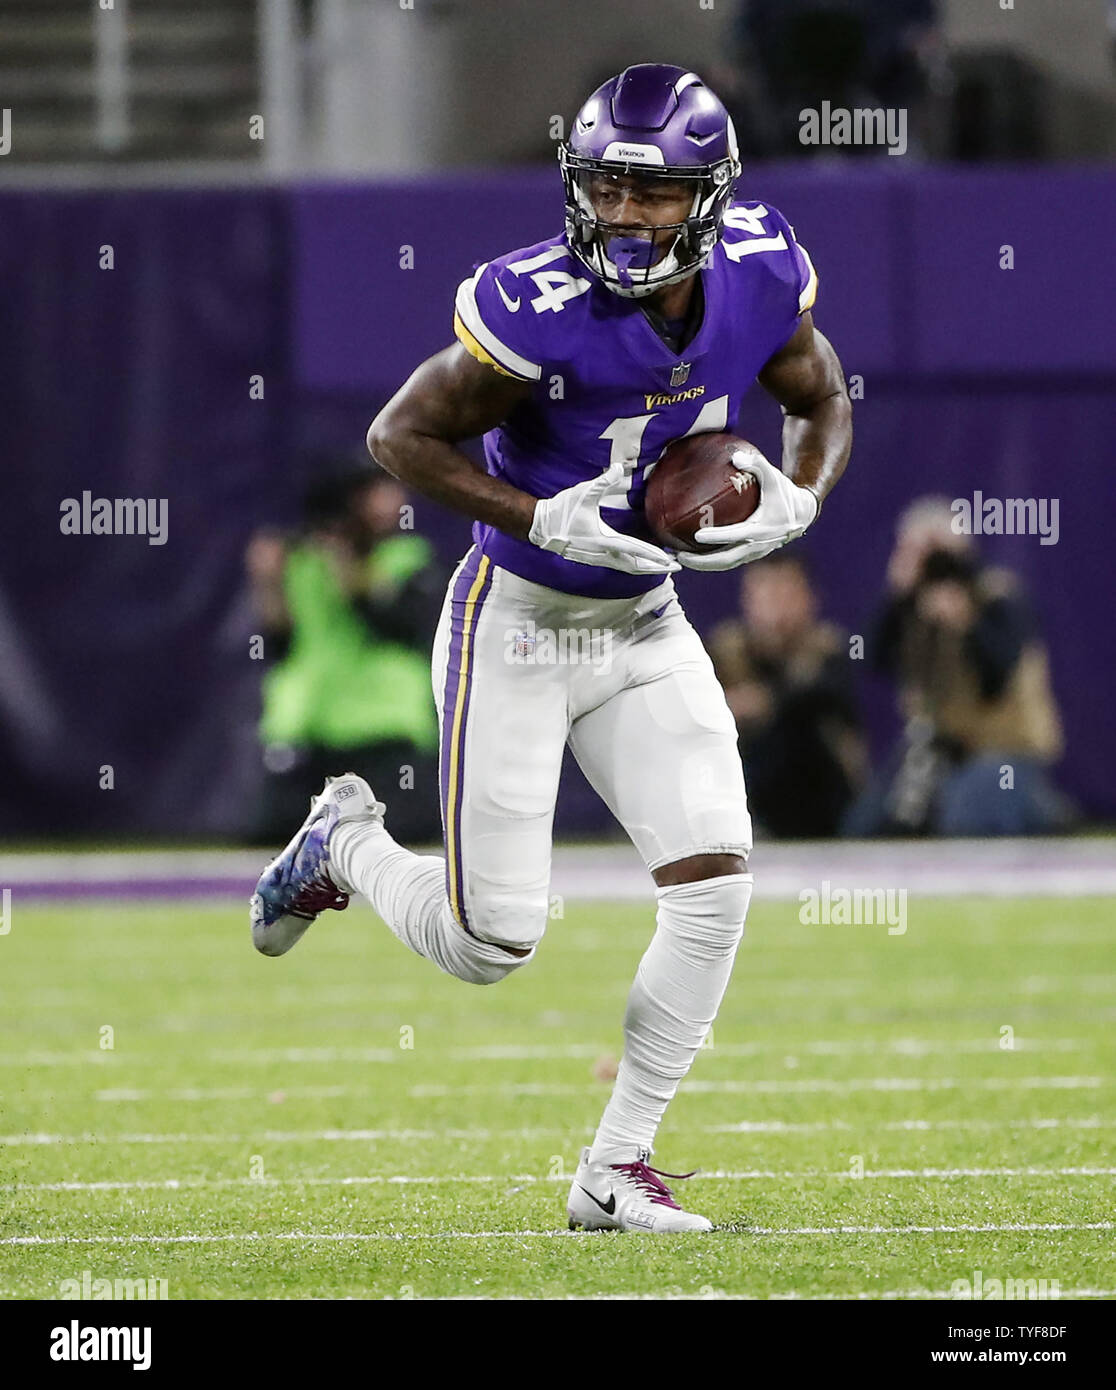 Minnesota Vikings wide receiver Stefon Diggs rushes with the ball against  the New Orleans Saints in the second half of the NFC Divisional round  playoff game at U.S. Bank Stadium in Minneapolis